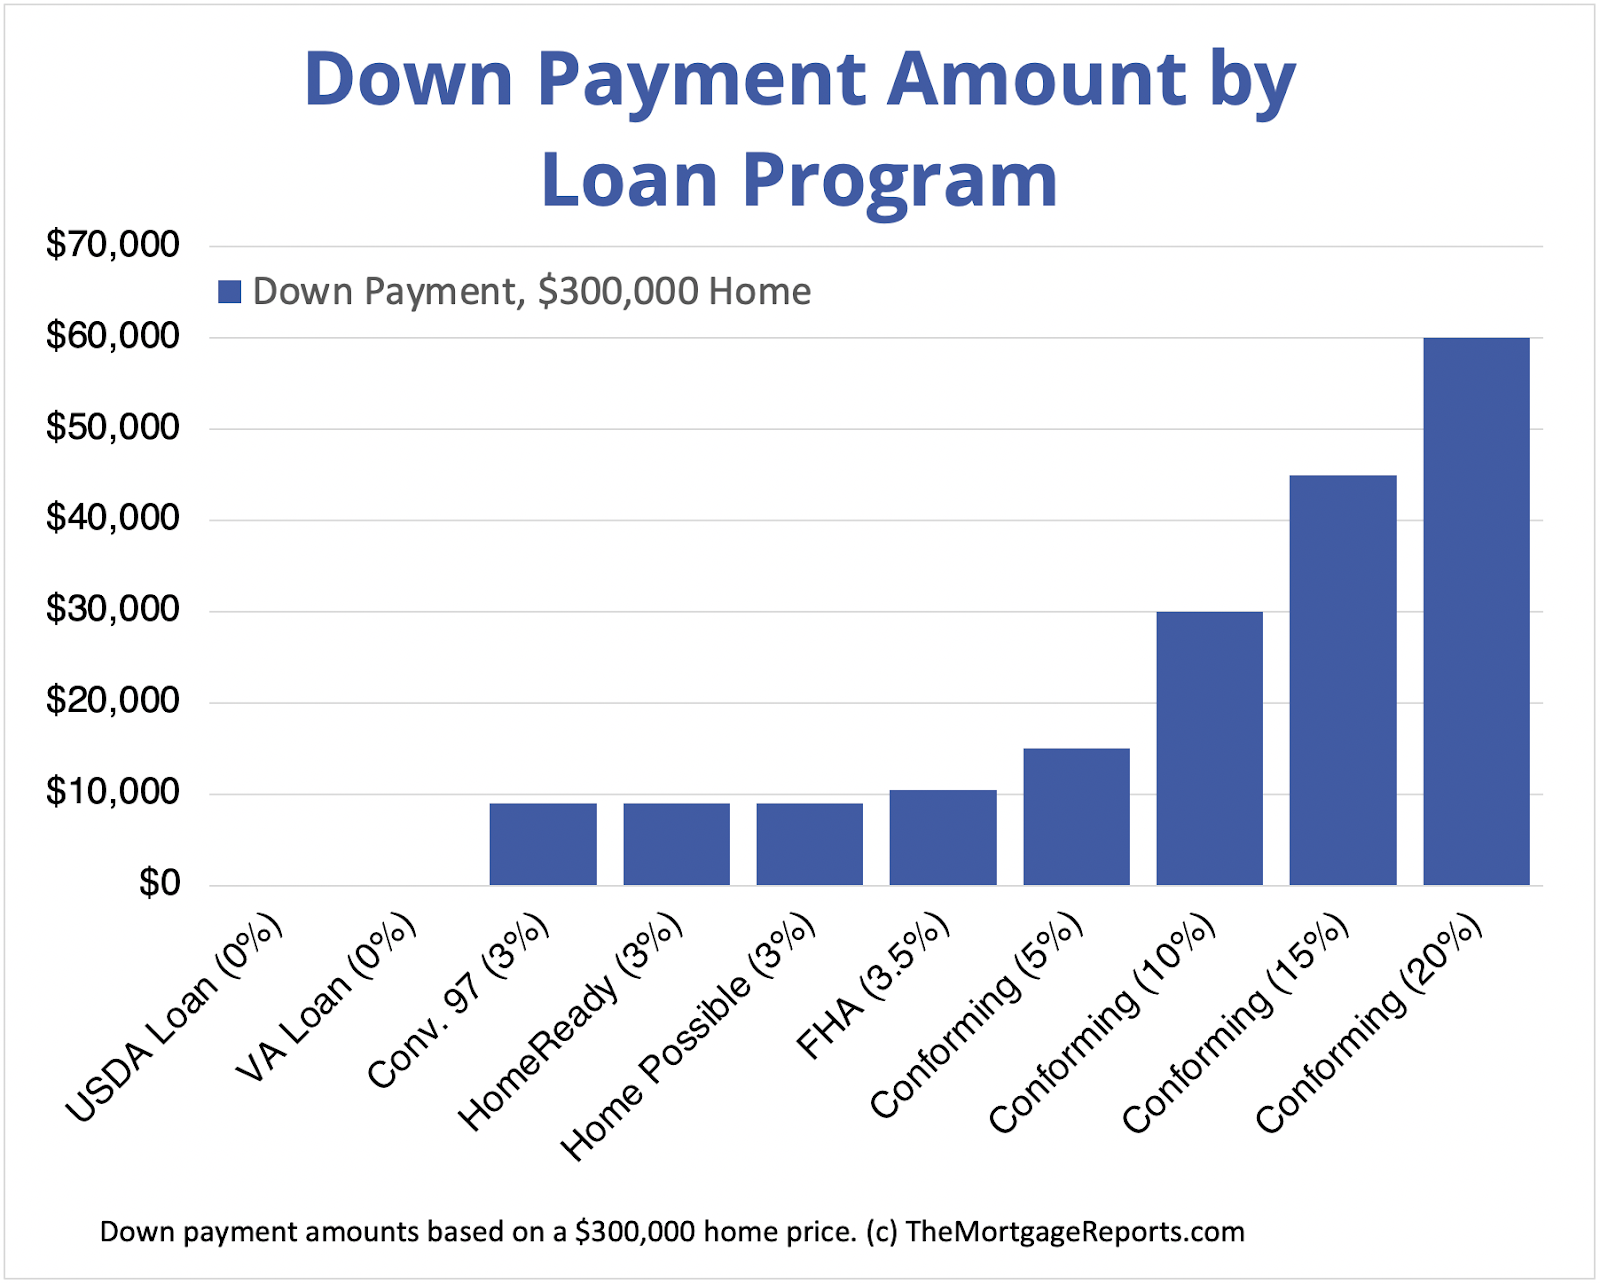 How Much Down Payment Do You Need for a House?